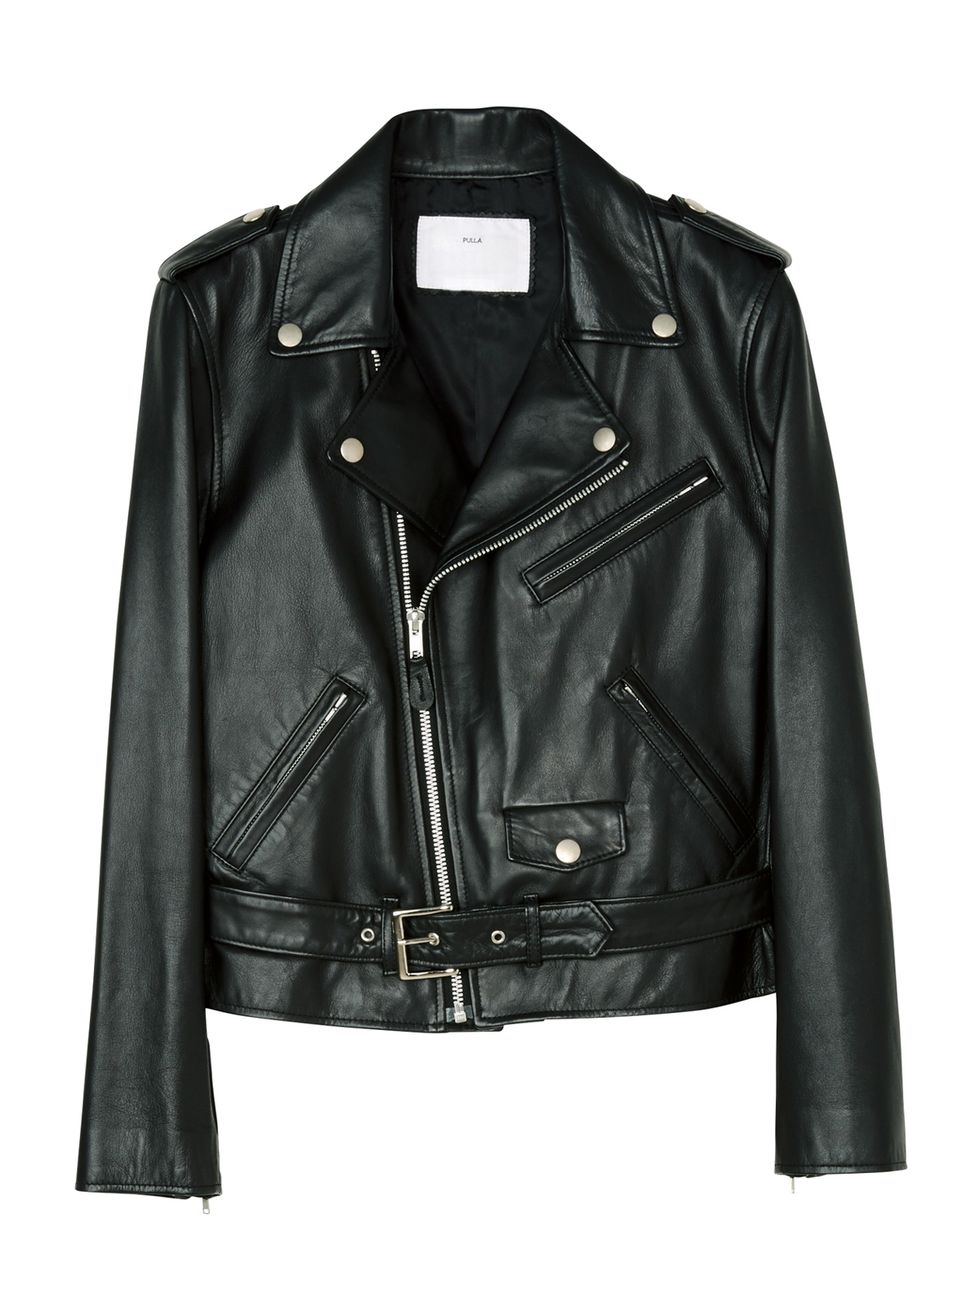 Clothing, Jacket, Leather, Leather jacket, Outerwear, Black, Sleeve, Textile, Top, Zipper, 